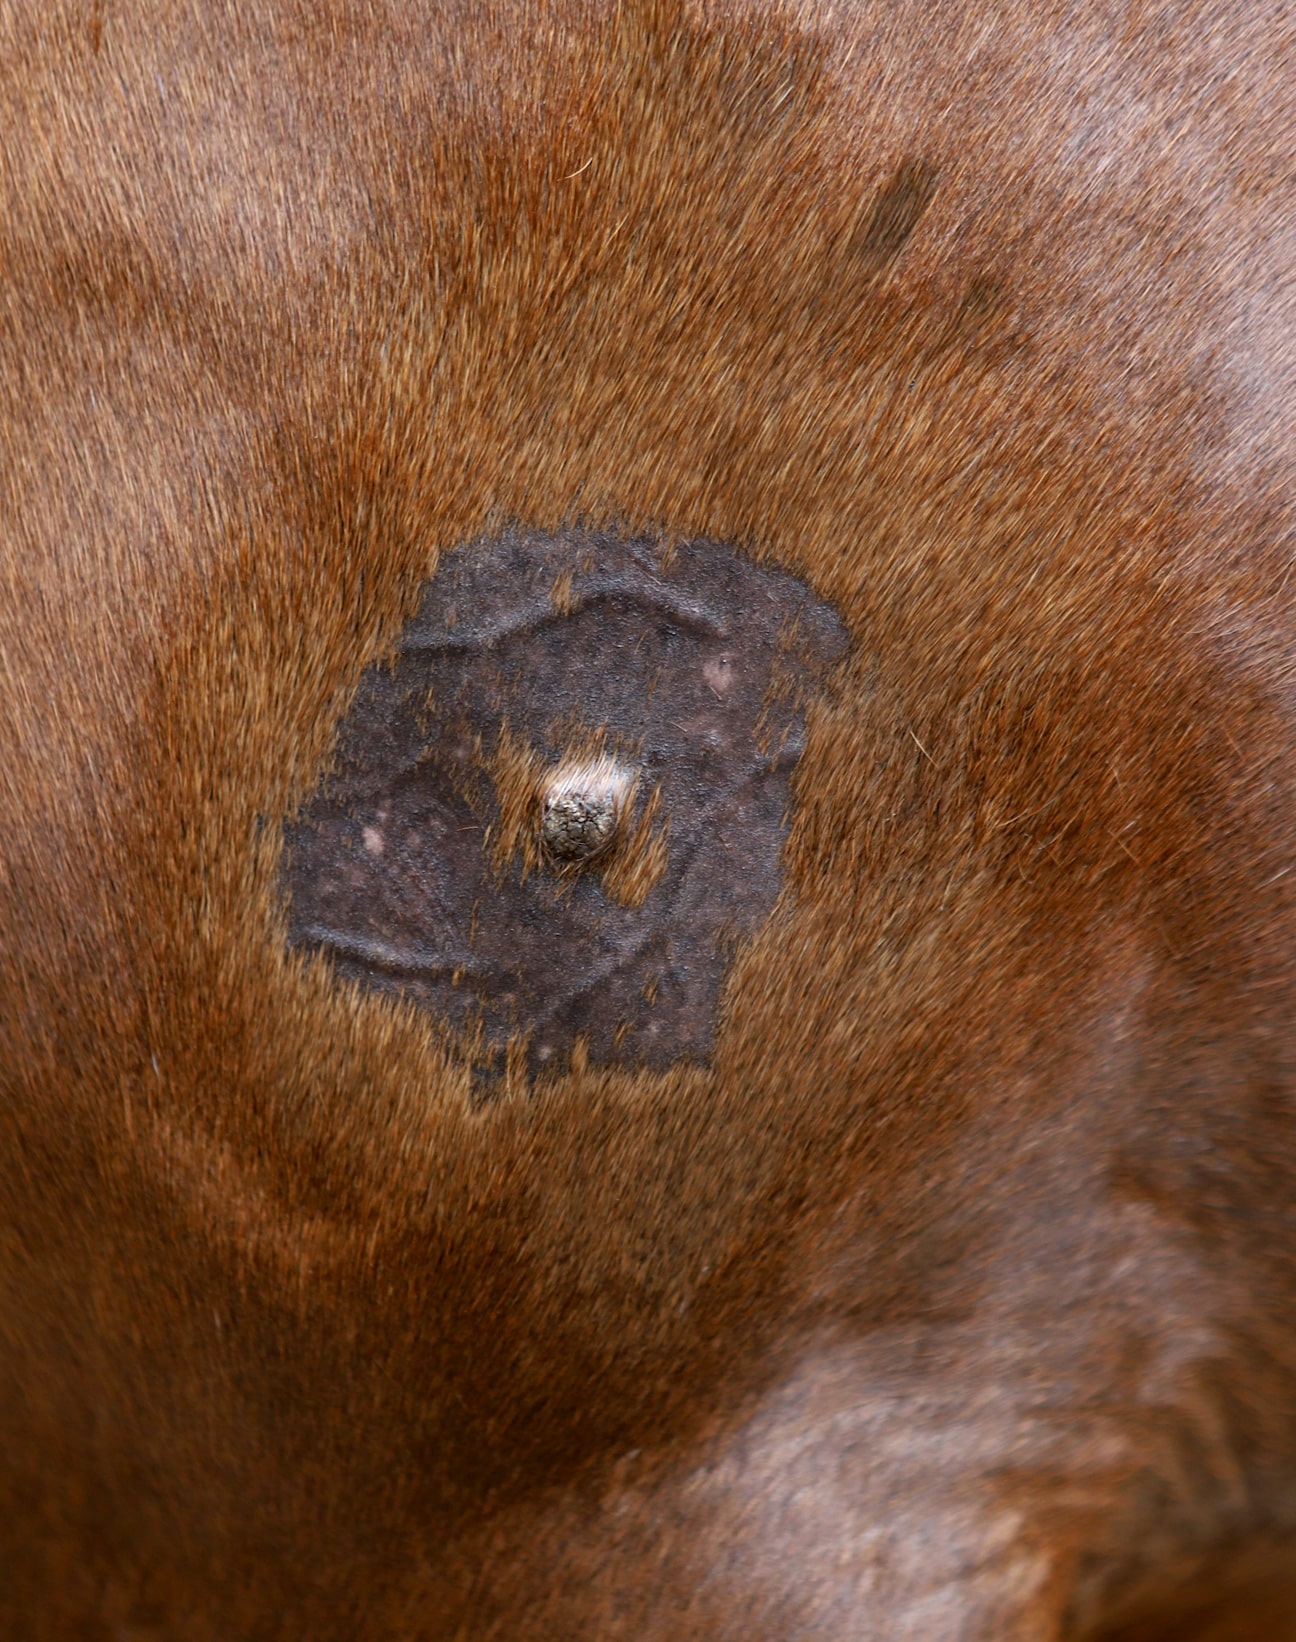 Located on the shoulder, this sarcoid was surgically removed (Image courtesy Dr Doug English).